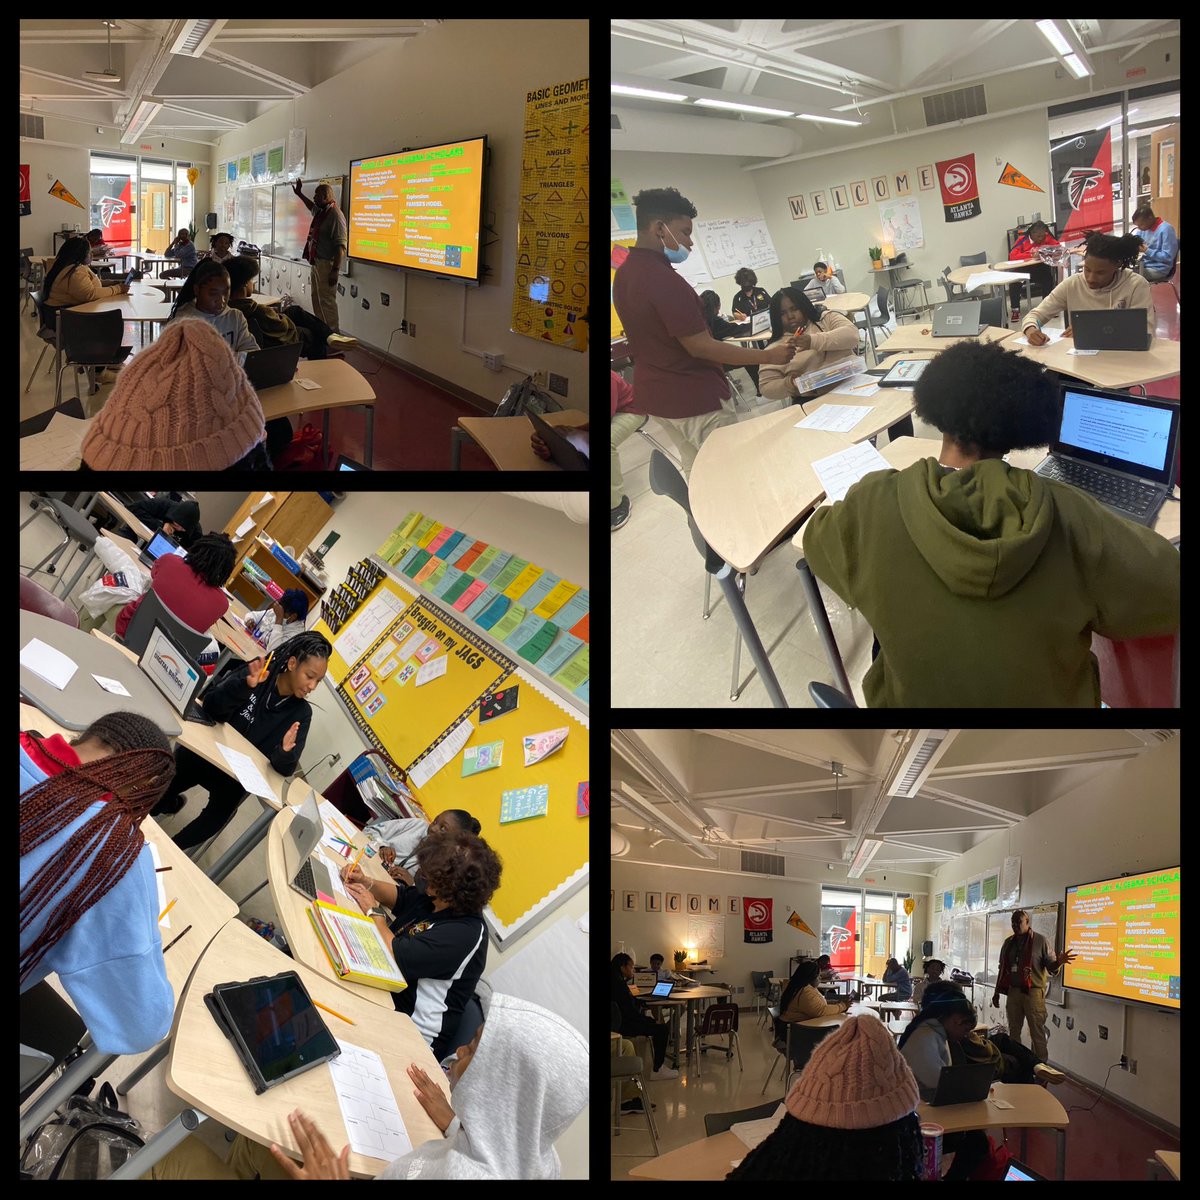 Absolutely enjoyed observing and interacting with Mr. Leaks Algebra I class this afternoon. #engaged #classroommanagement @apsitnatasha @drizm26 @APSMHJHSJaguars @ahrosser @APSInstructTech